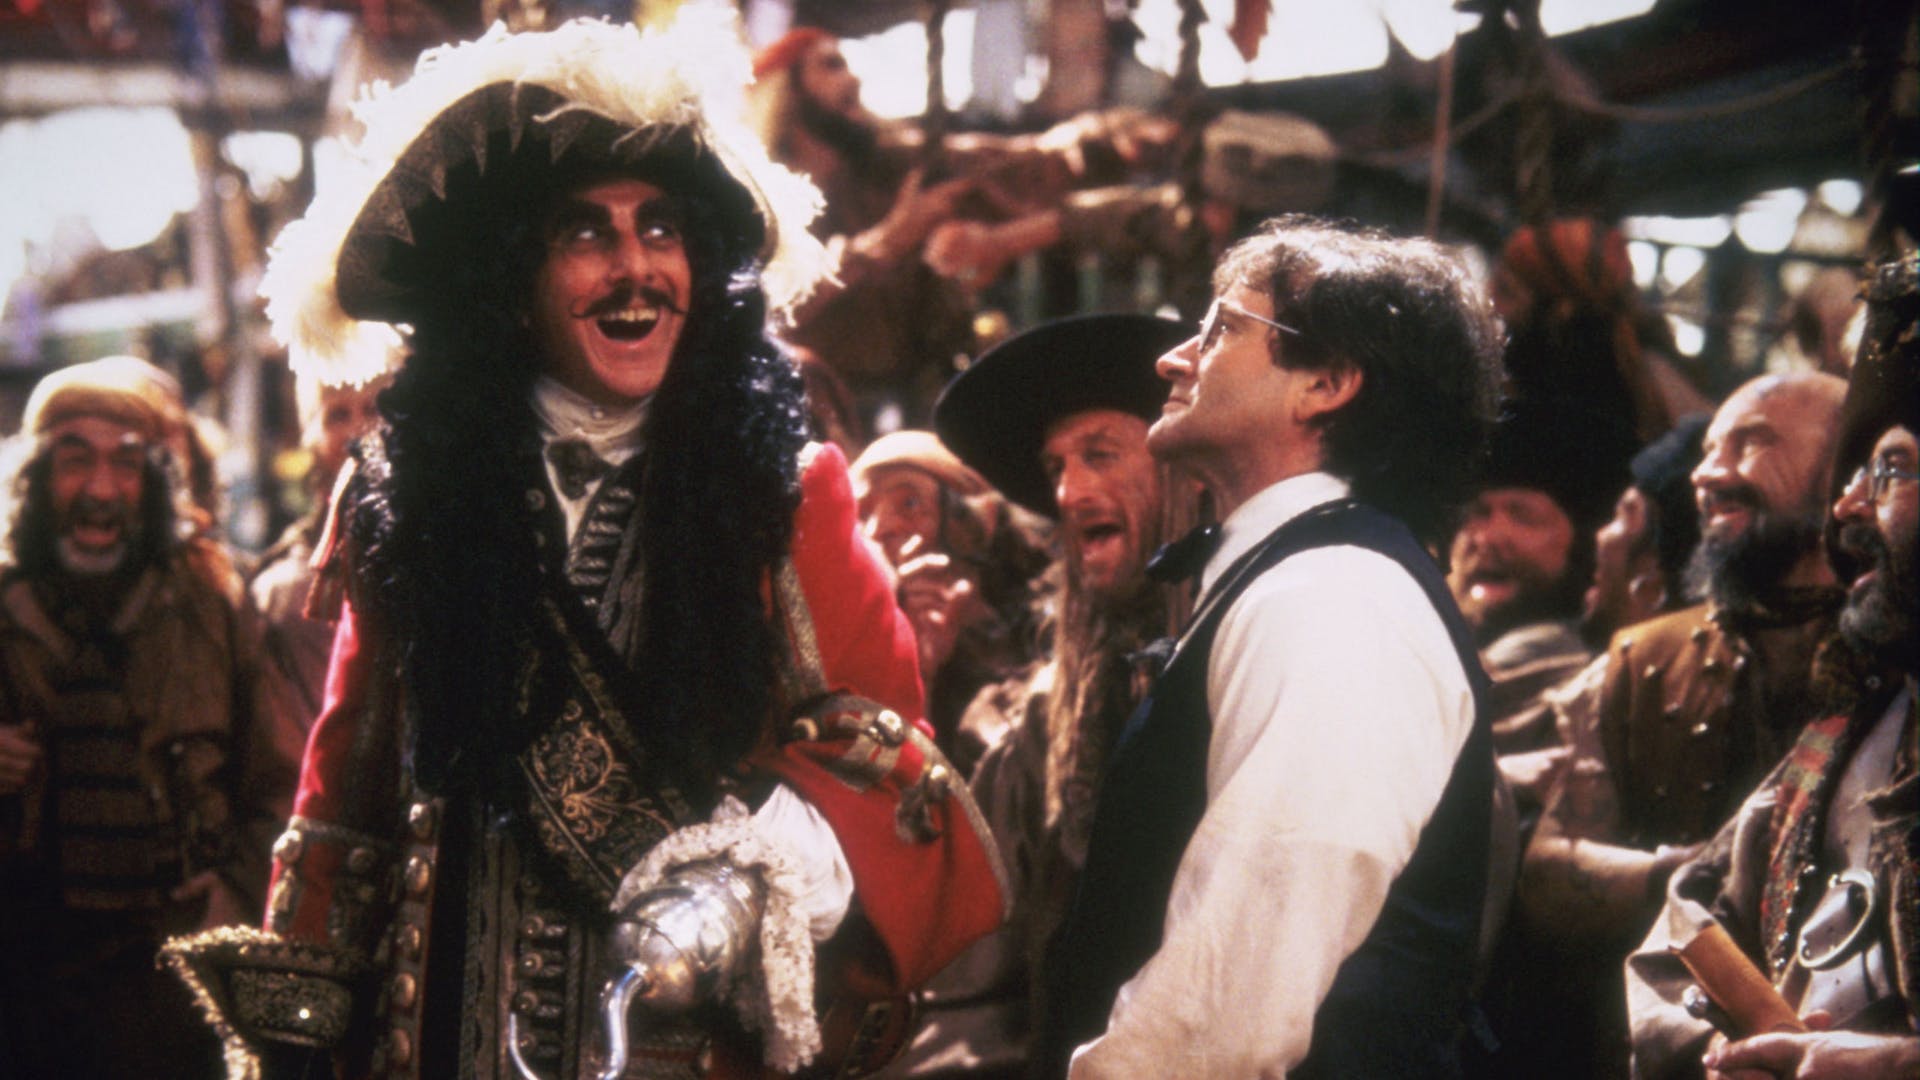 HOOK is Coming to 4K UHD Blu-ray this October!